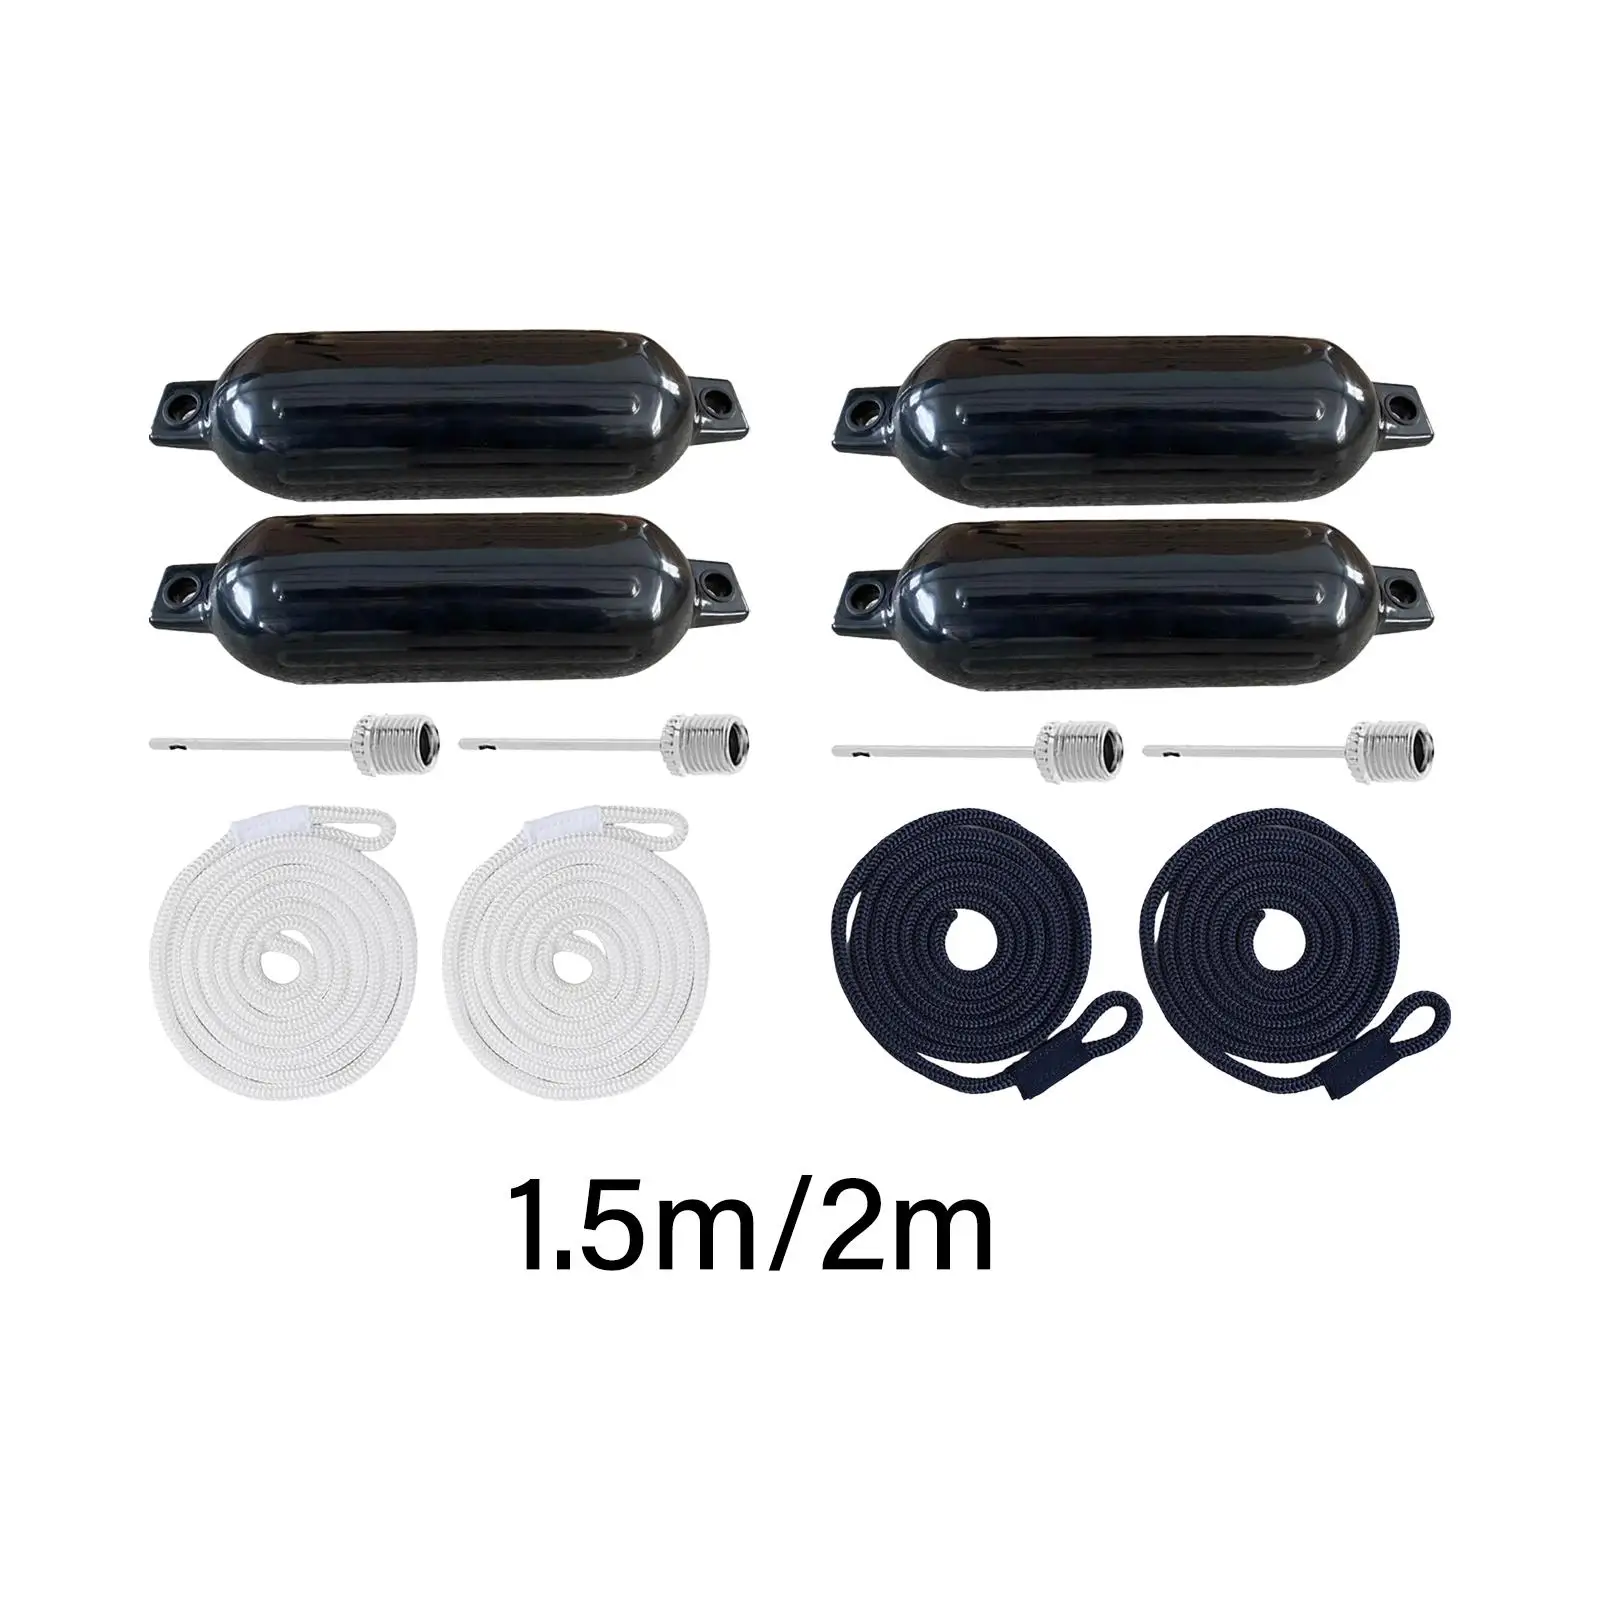 

Boat Fender Kit with Rope 4x16inch Anti Collision Protector Boat Bumpers for Speedboat Sailboats Pontoon Yacht Docking